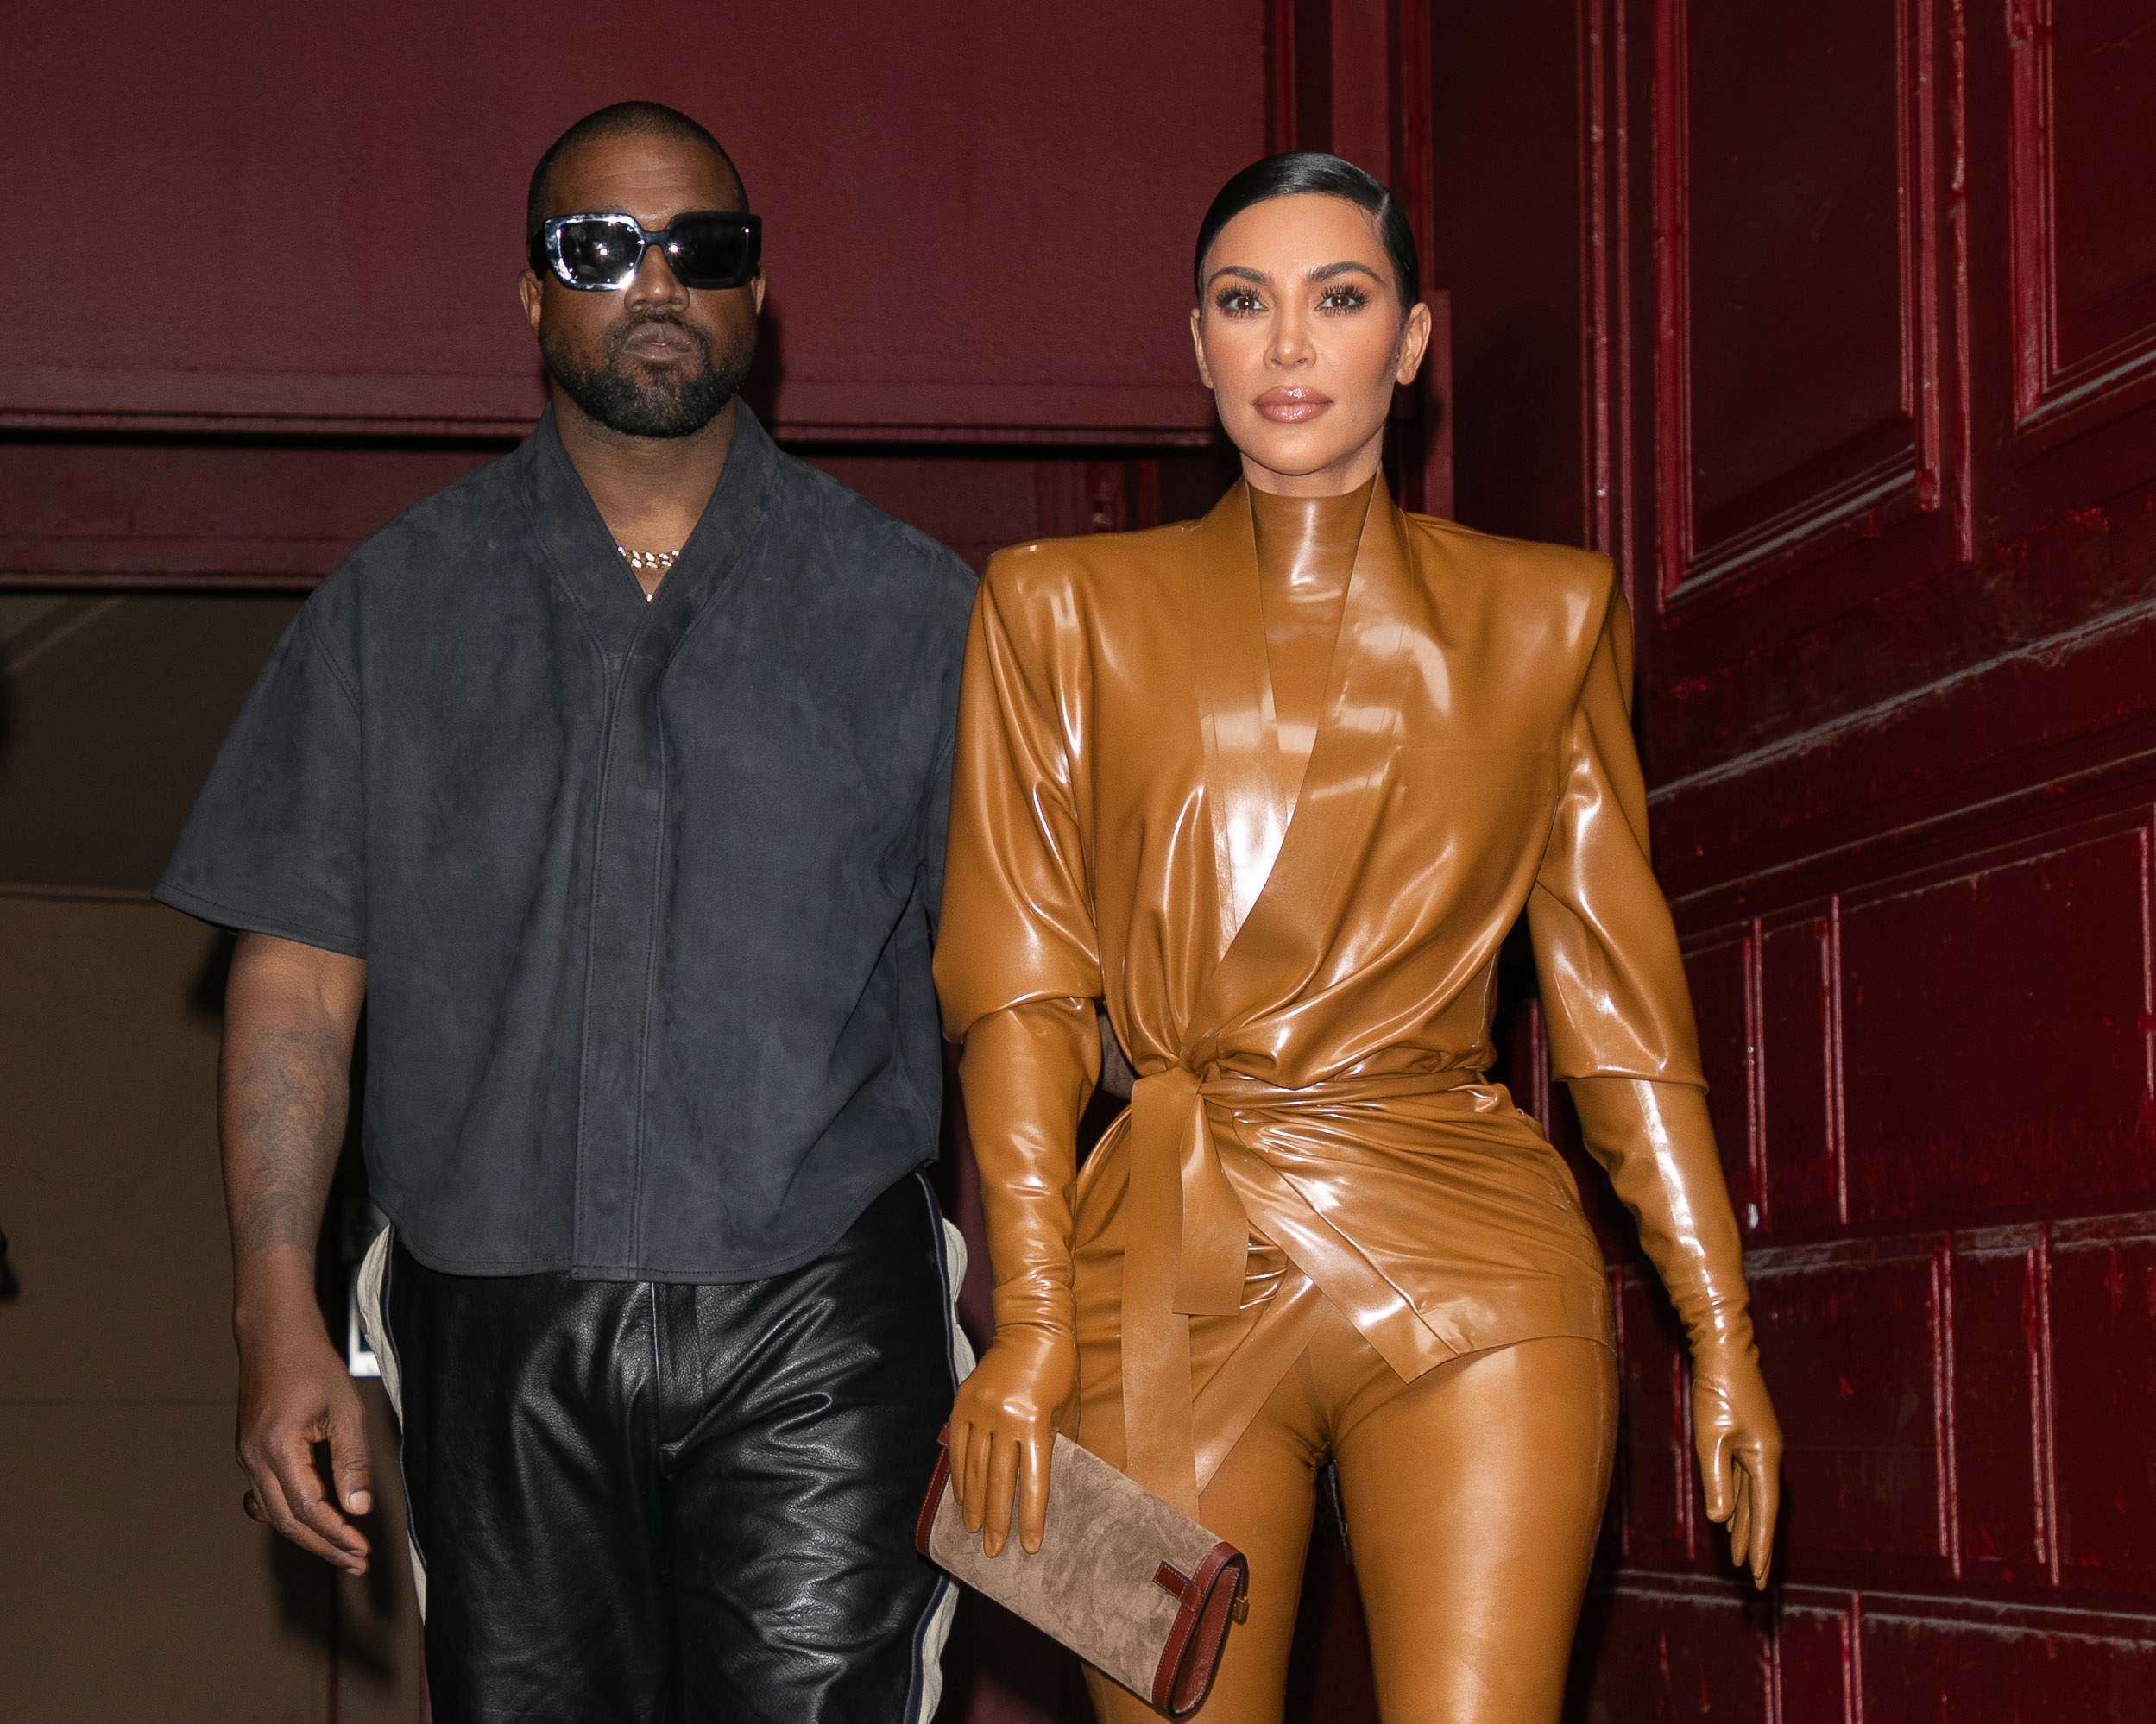 Kanye and Kim walking out of a building together